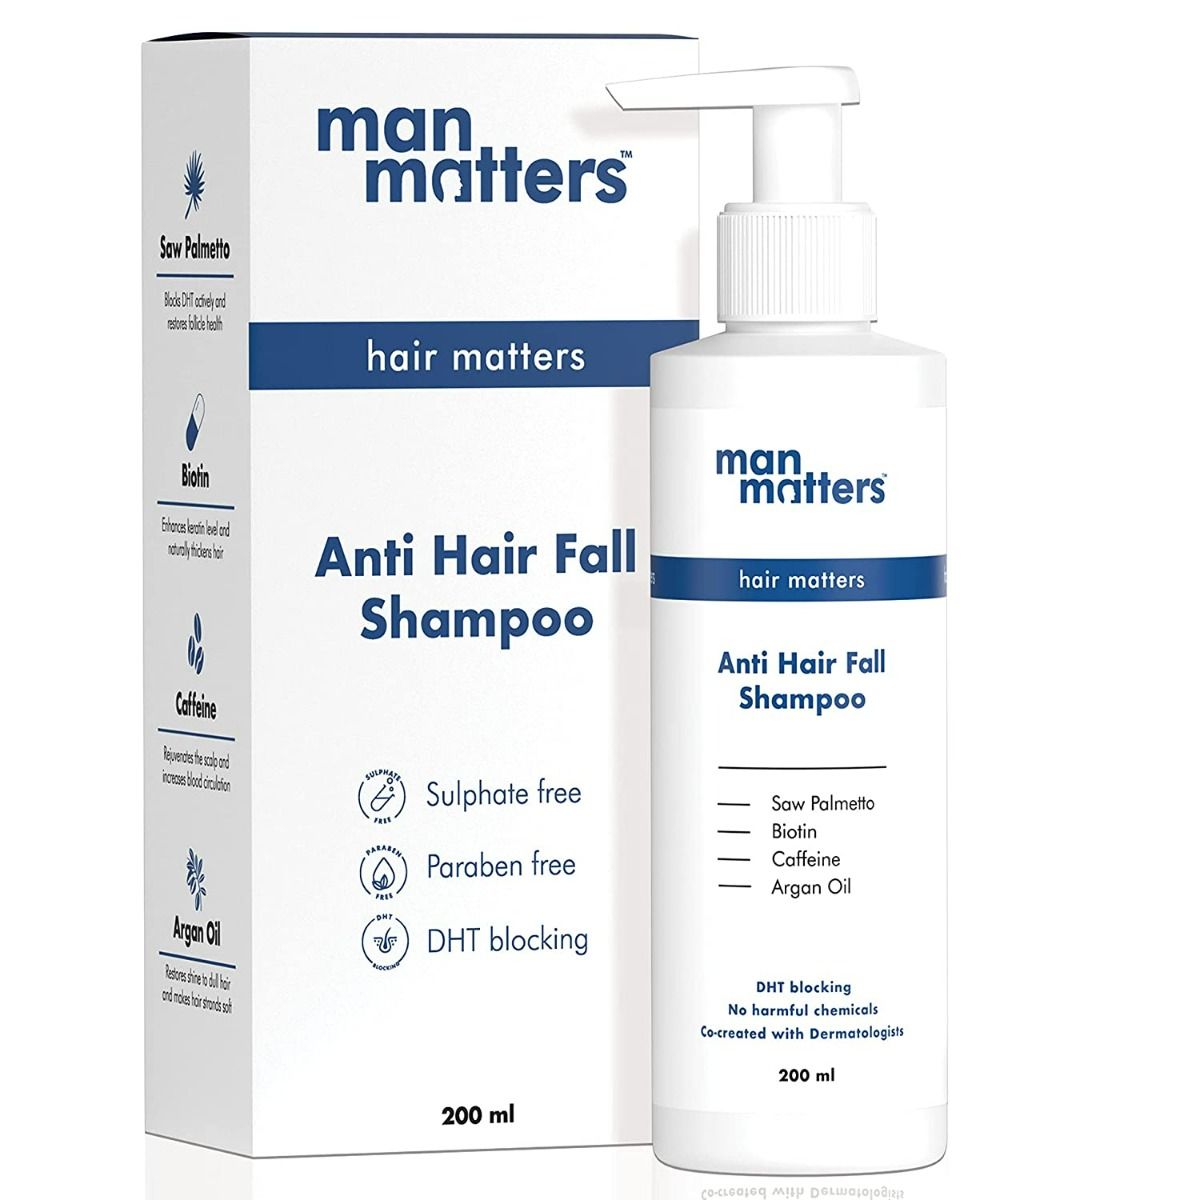 Man Matters Anti Hair Fall Shampoo, 200 ml Price, Uses, Side Effects,  Composition - Apollo Pharmacy